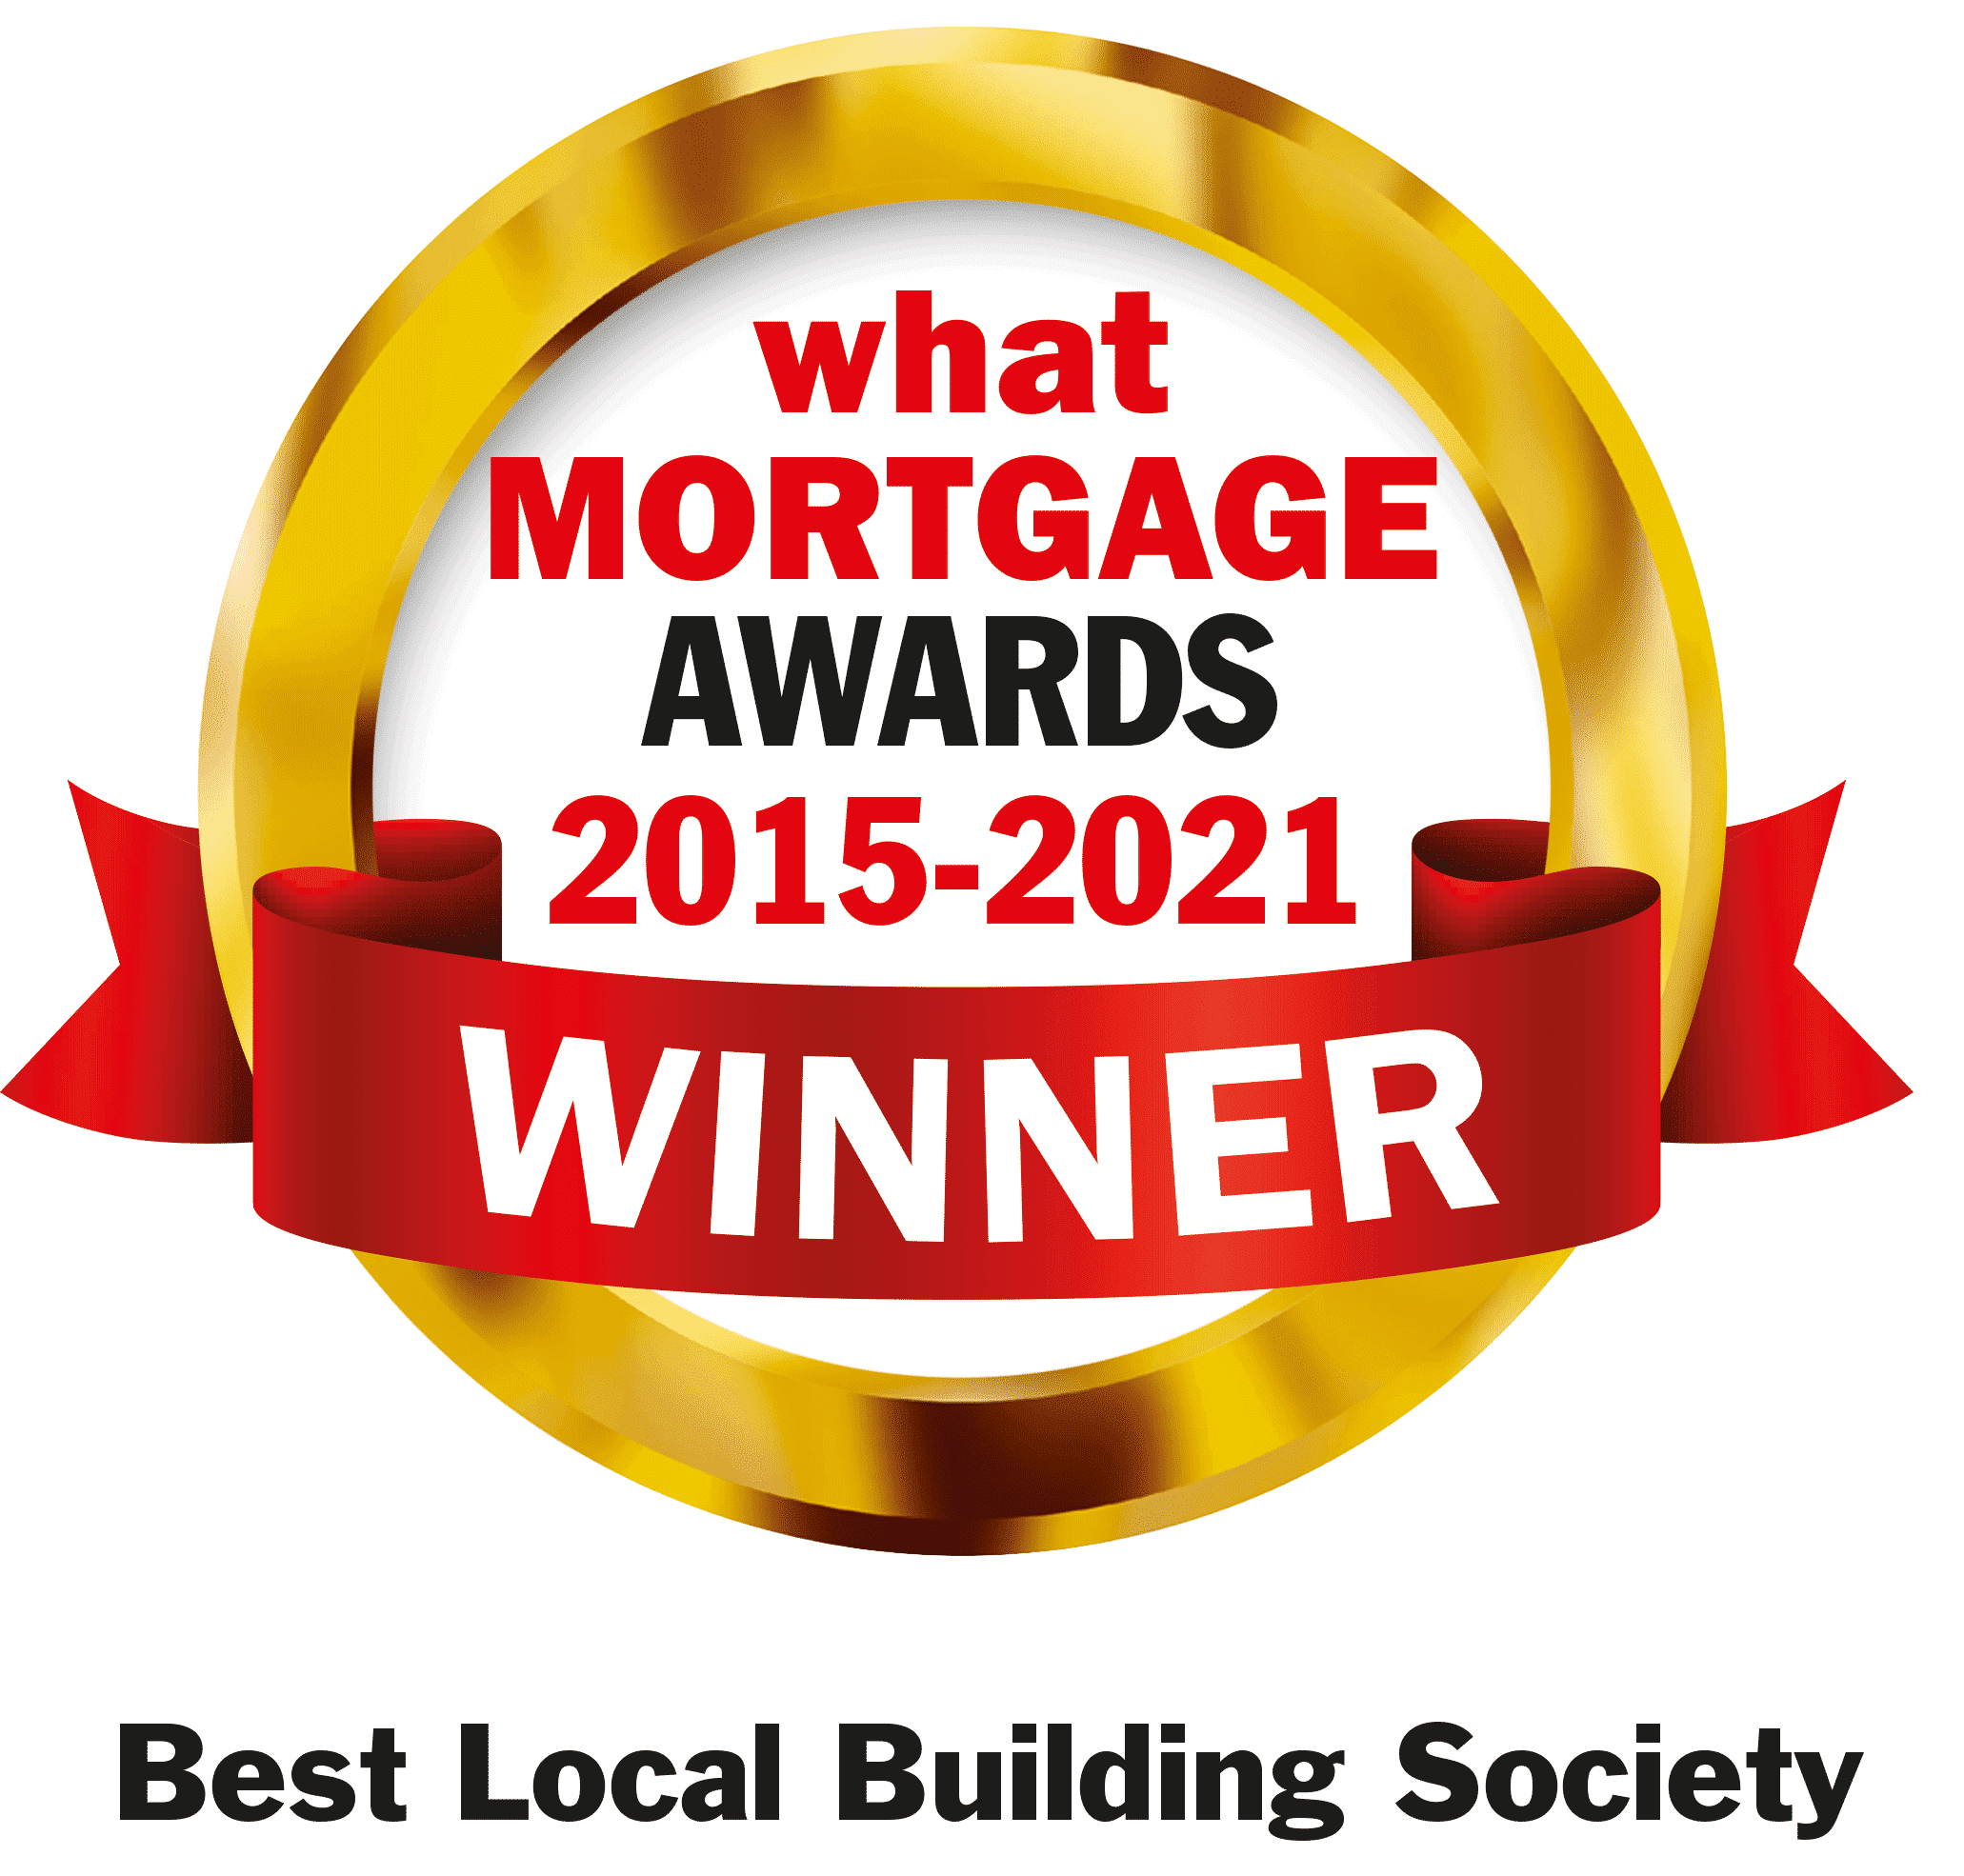 Winner of What Mortgage Awards 2015 to 2021